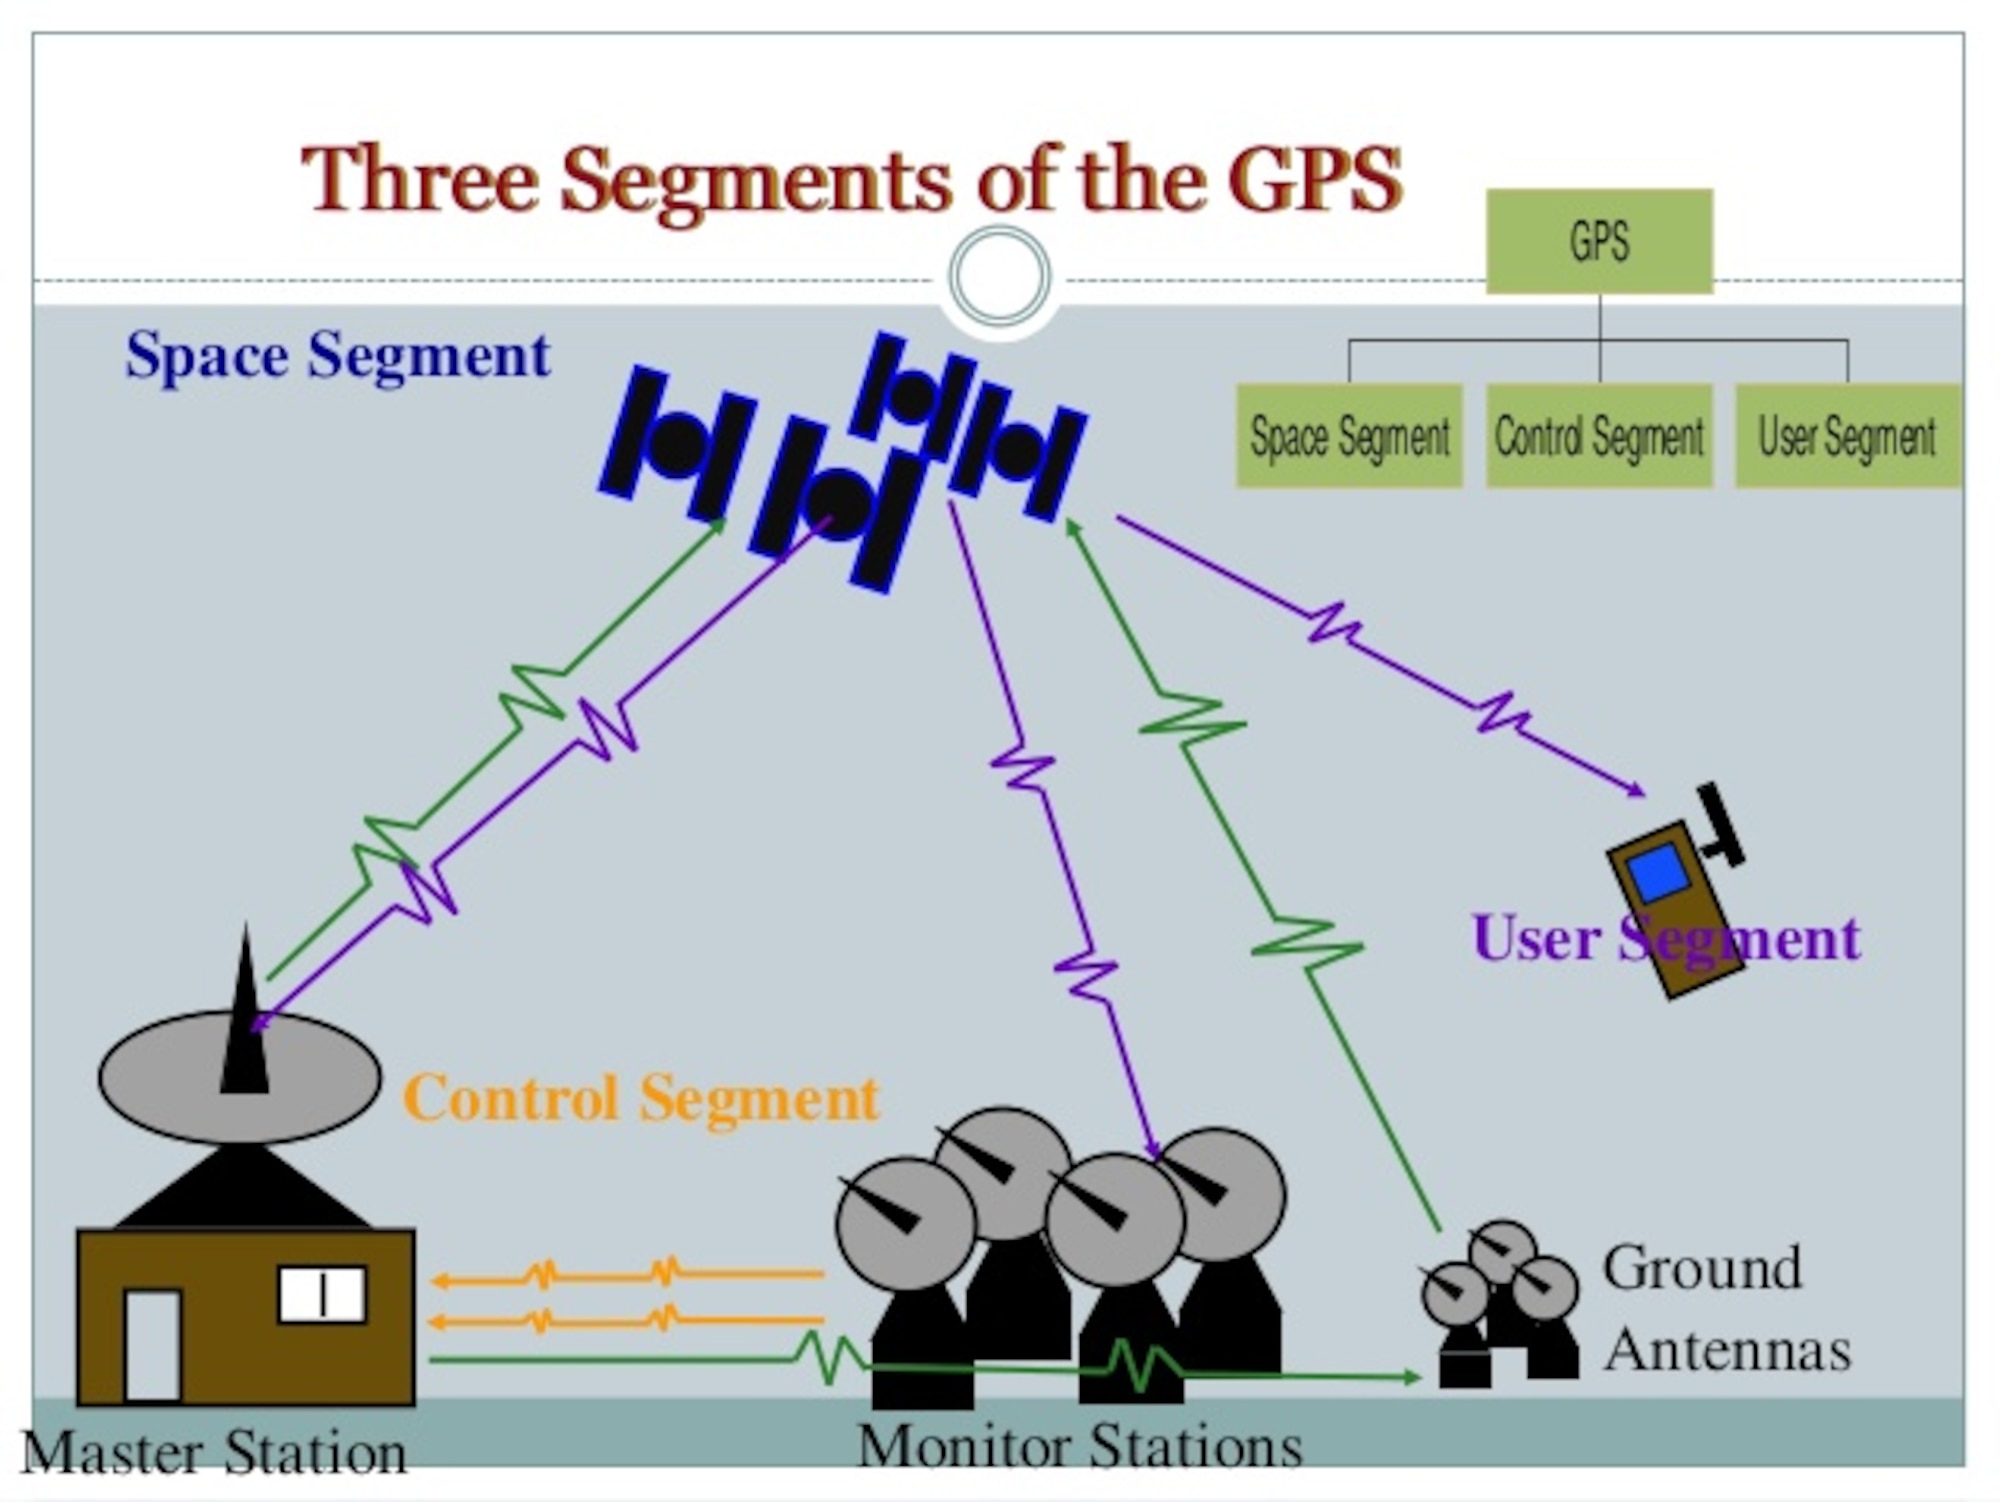 GPS is made up of three parts: satellites, ground stations, and receivers. The satellites act like the stars in constellations — we know where they are supposed to be at any given time within a small range of error. The satellites broadcast their location to the ground stations, and the ground stations are able to detect and correct that error in future uploads to the satellites. When the satellite’s location is more accurately broadcasted to the receivers, the receivers can calculate a more accurate position. A receiver, like you might find in your smartphone or navigation system in a car, is constantly listening for a signal from these satellites. The receiver figures out how far away they are from the satellites in view. Once the receiver calculates its distance from four or more satellites, it knows exactly where you are within a few yards of your actual location. (Courtesy graphic) 